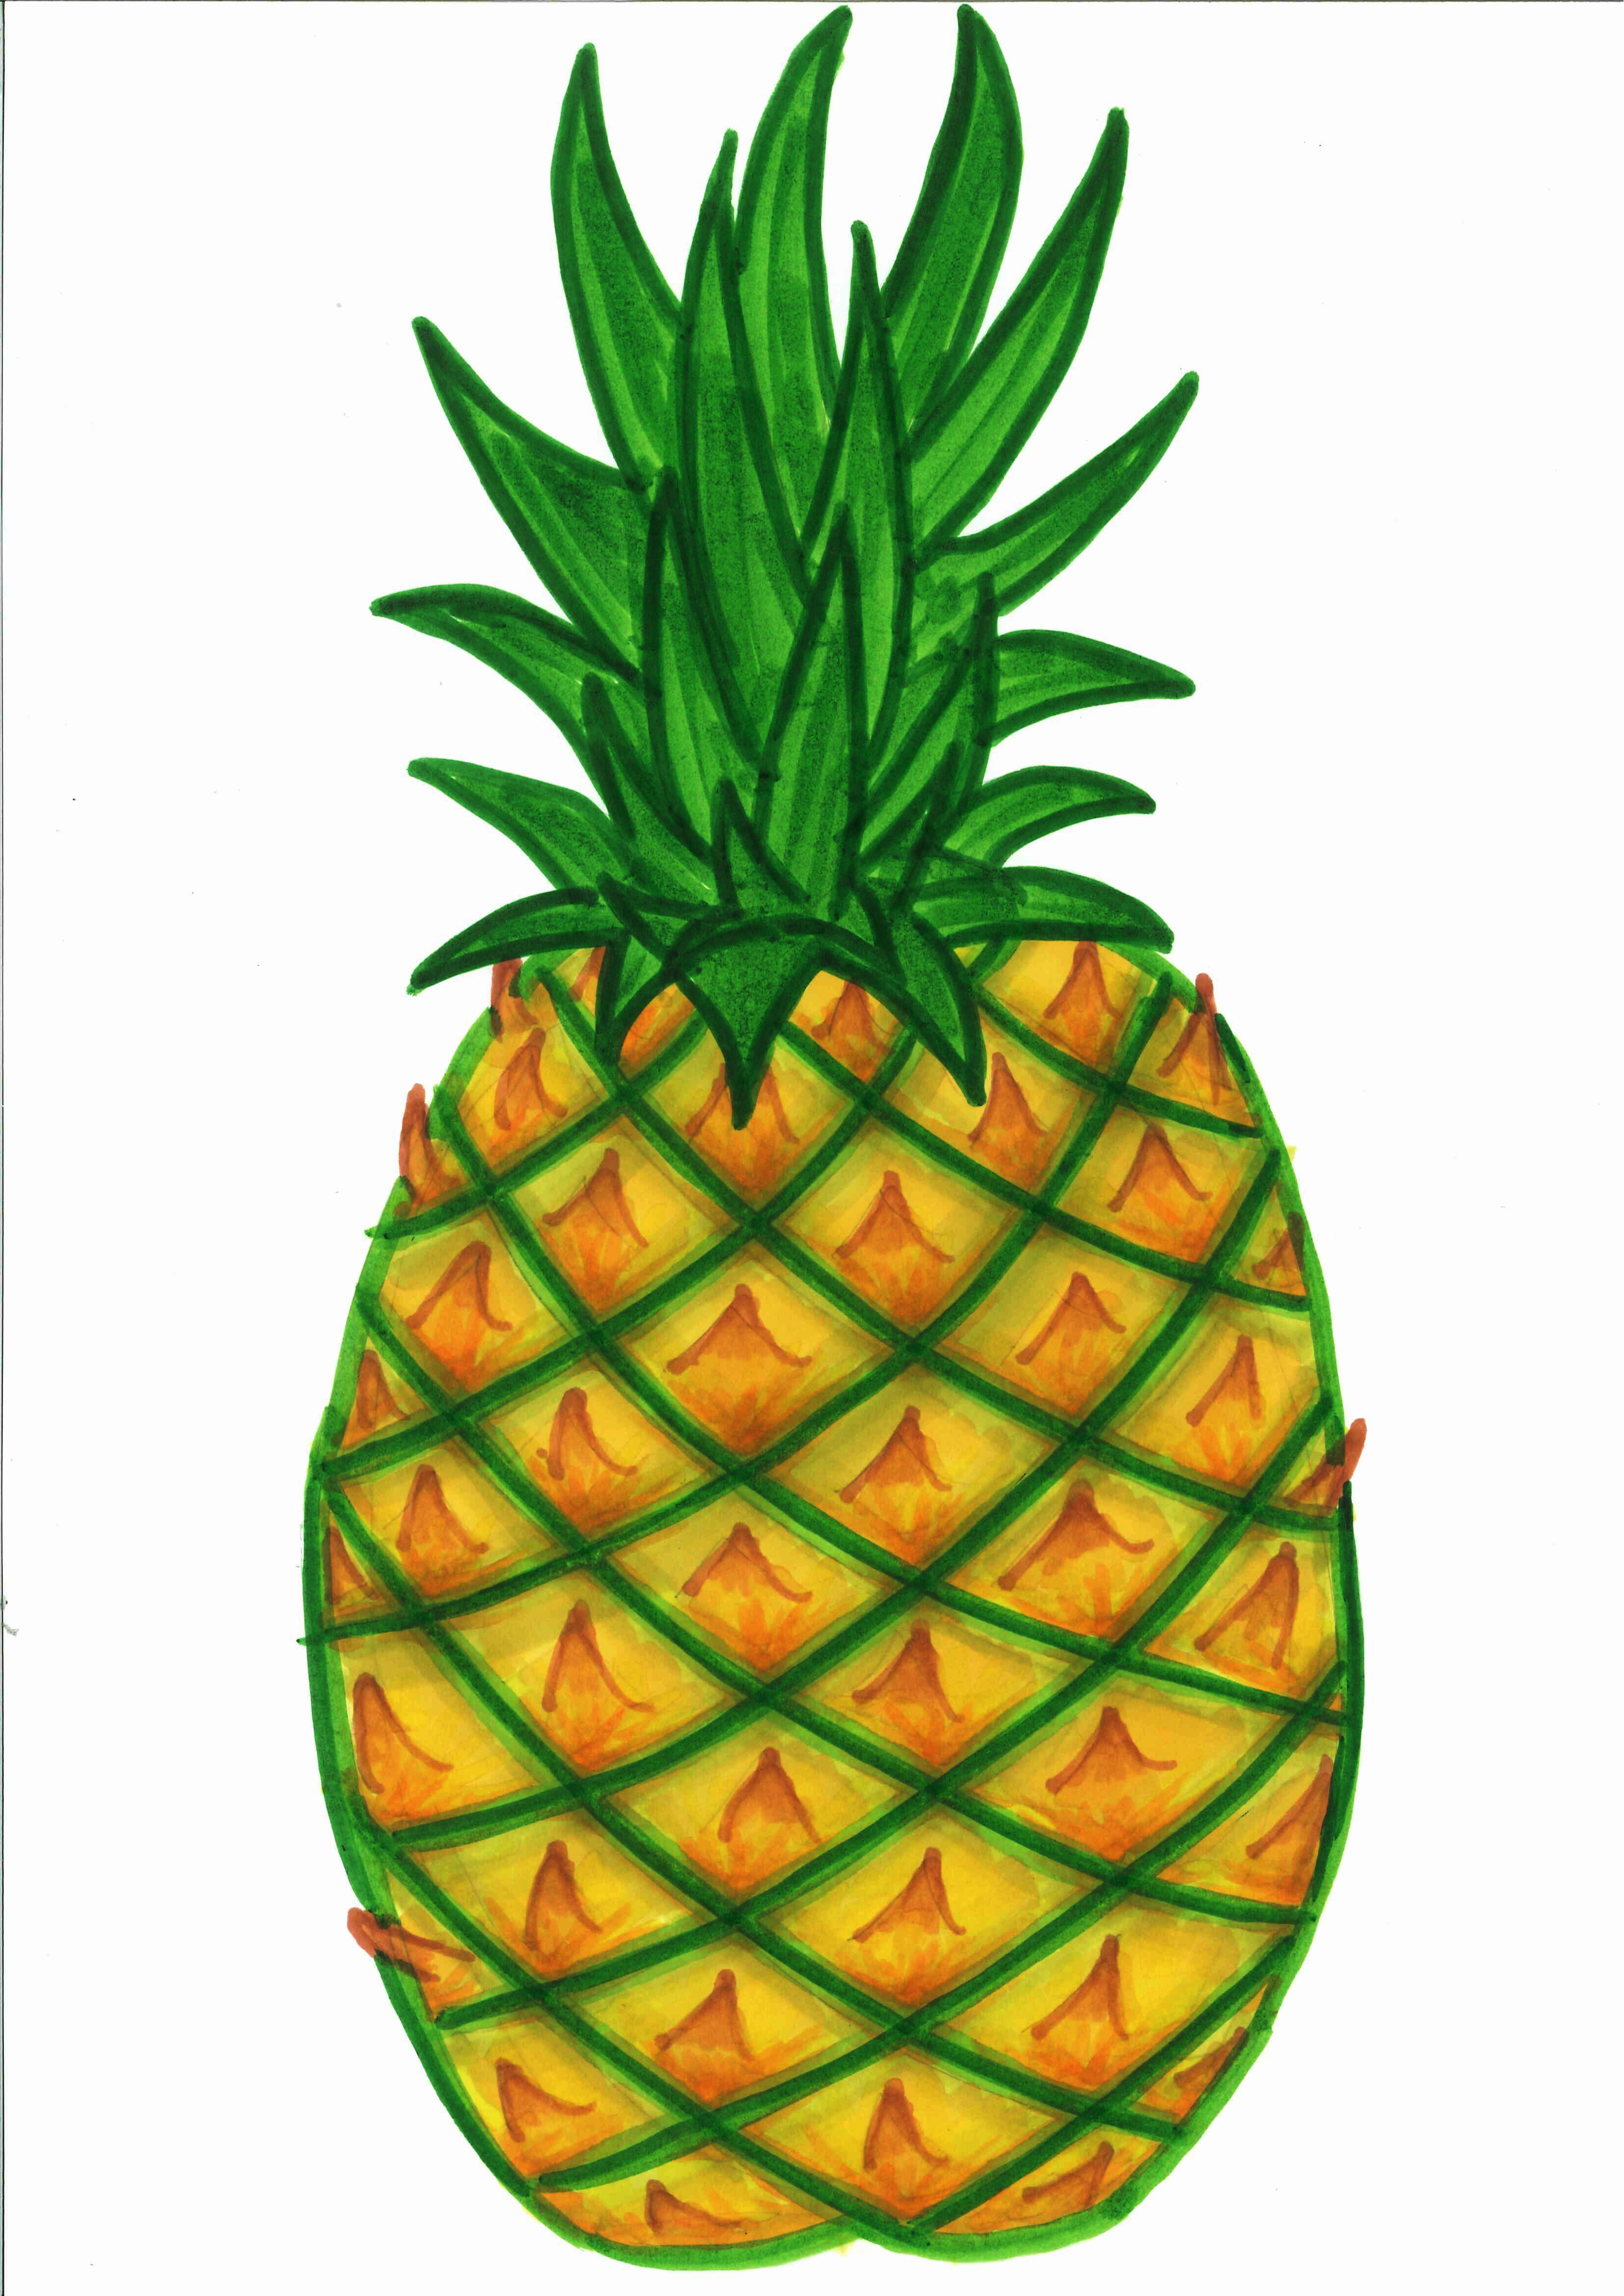 Pineapple. Stock Images